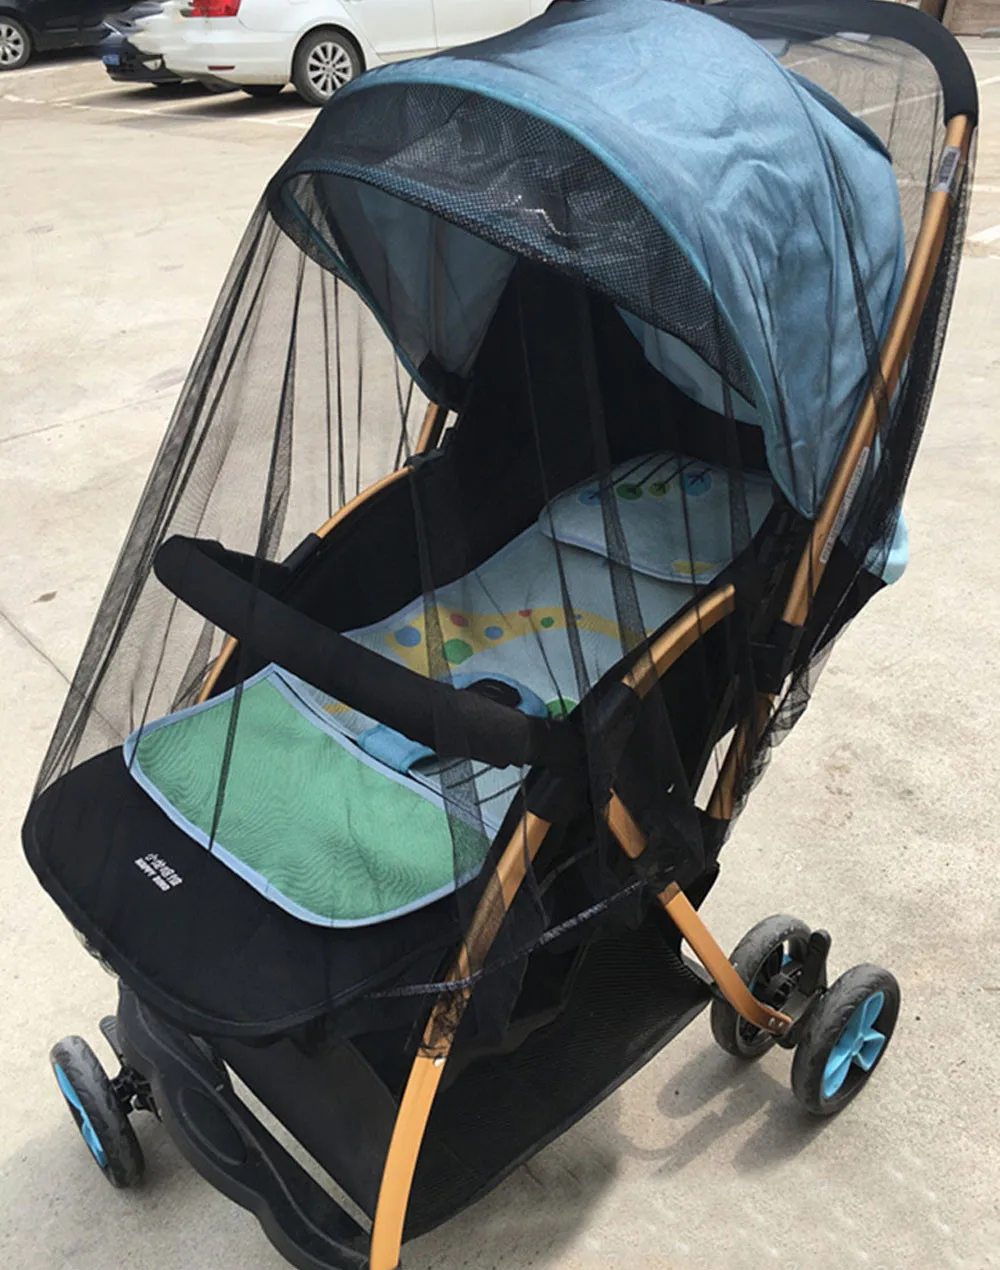 Baby Strollers expensive Baby Crib Seat Mosquito Net Newborn Curtain Car Seat Insect Netting Canopy Cover Infants Pushchair Cart Mosquito Insect Net New baby stroller accessories	